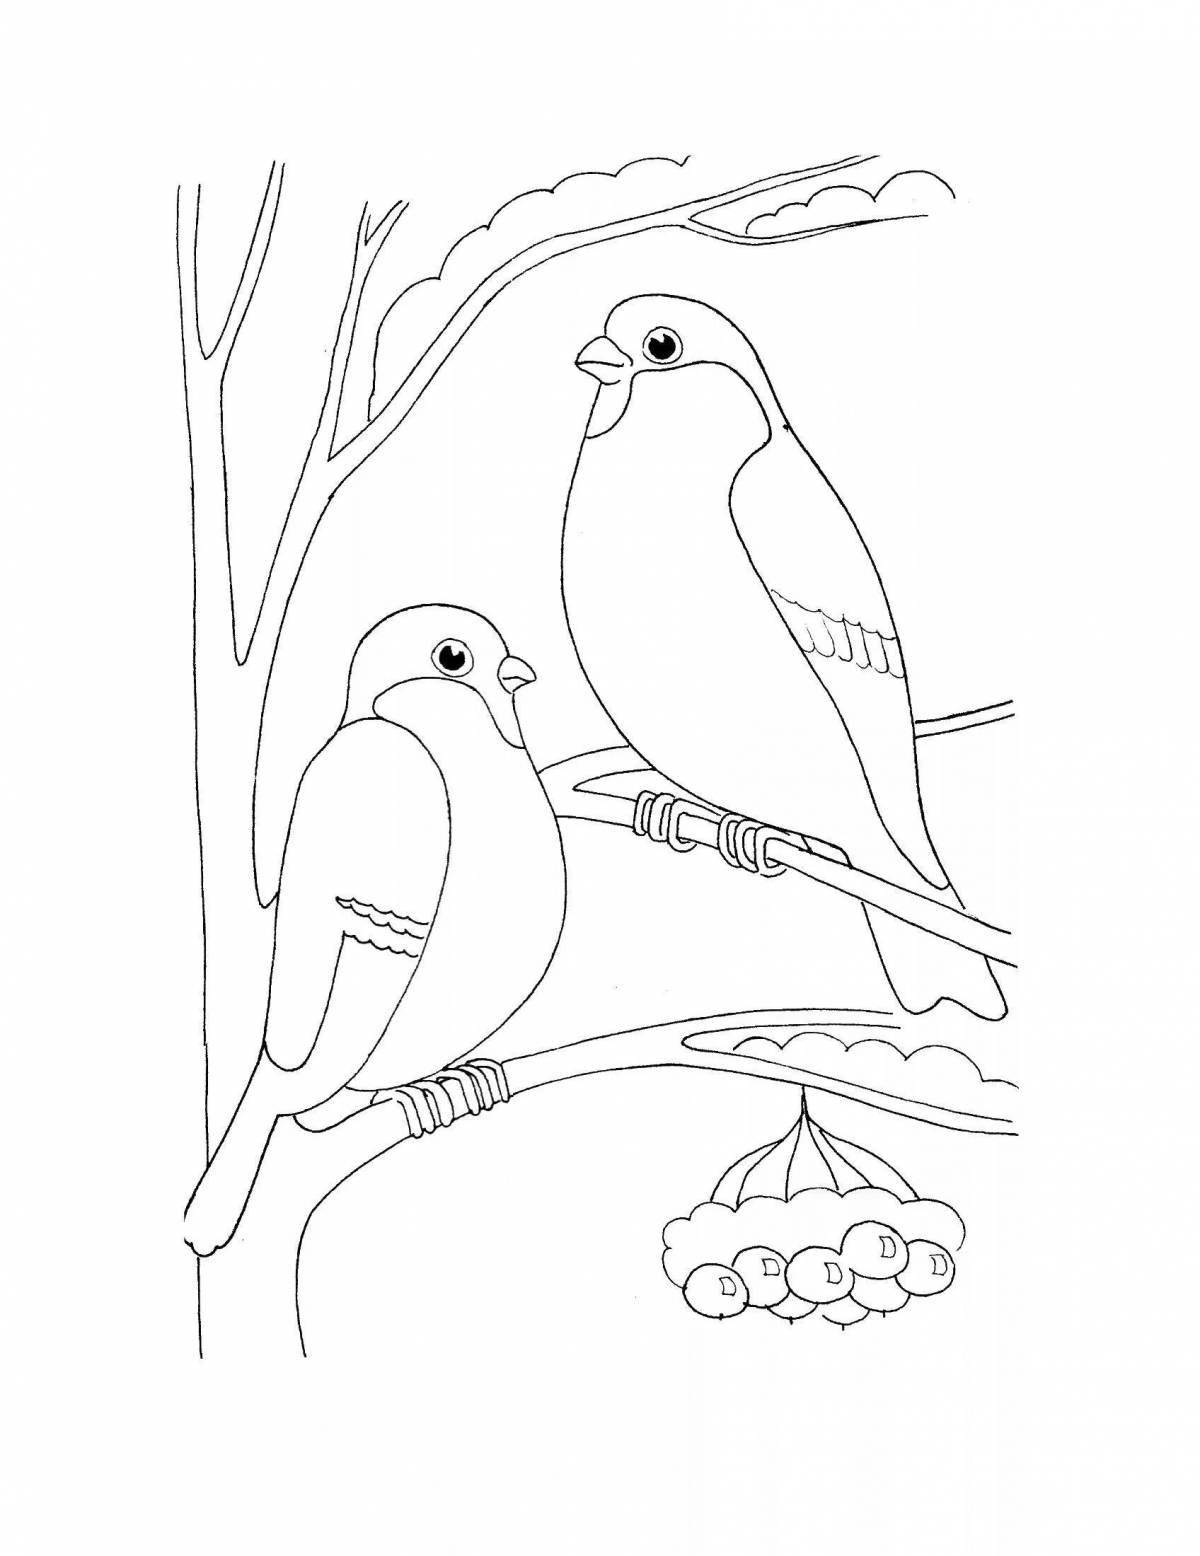 Coloring book flapping birds on a branch in winter